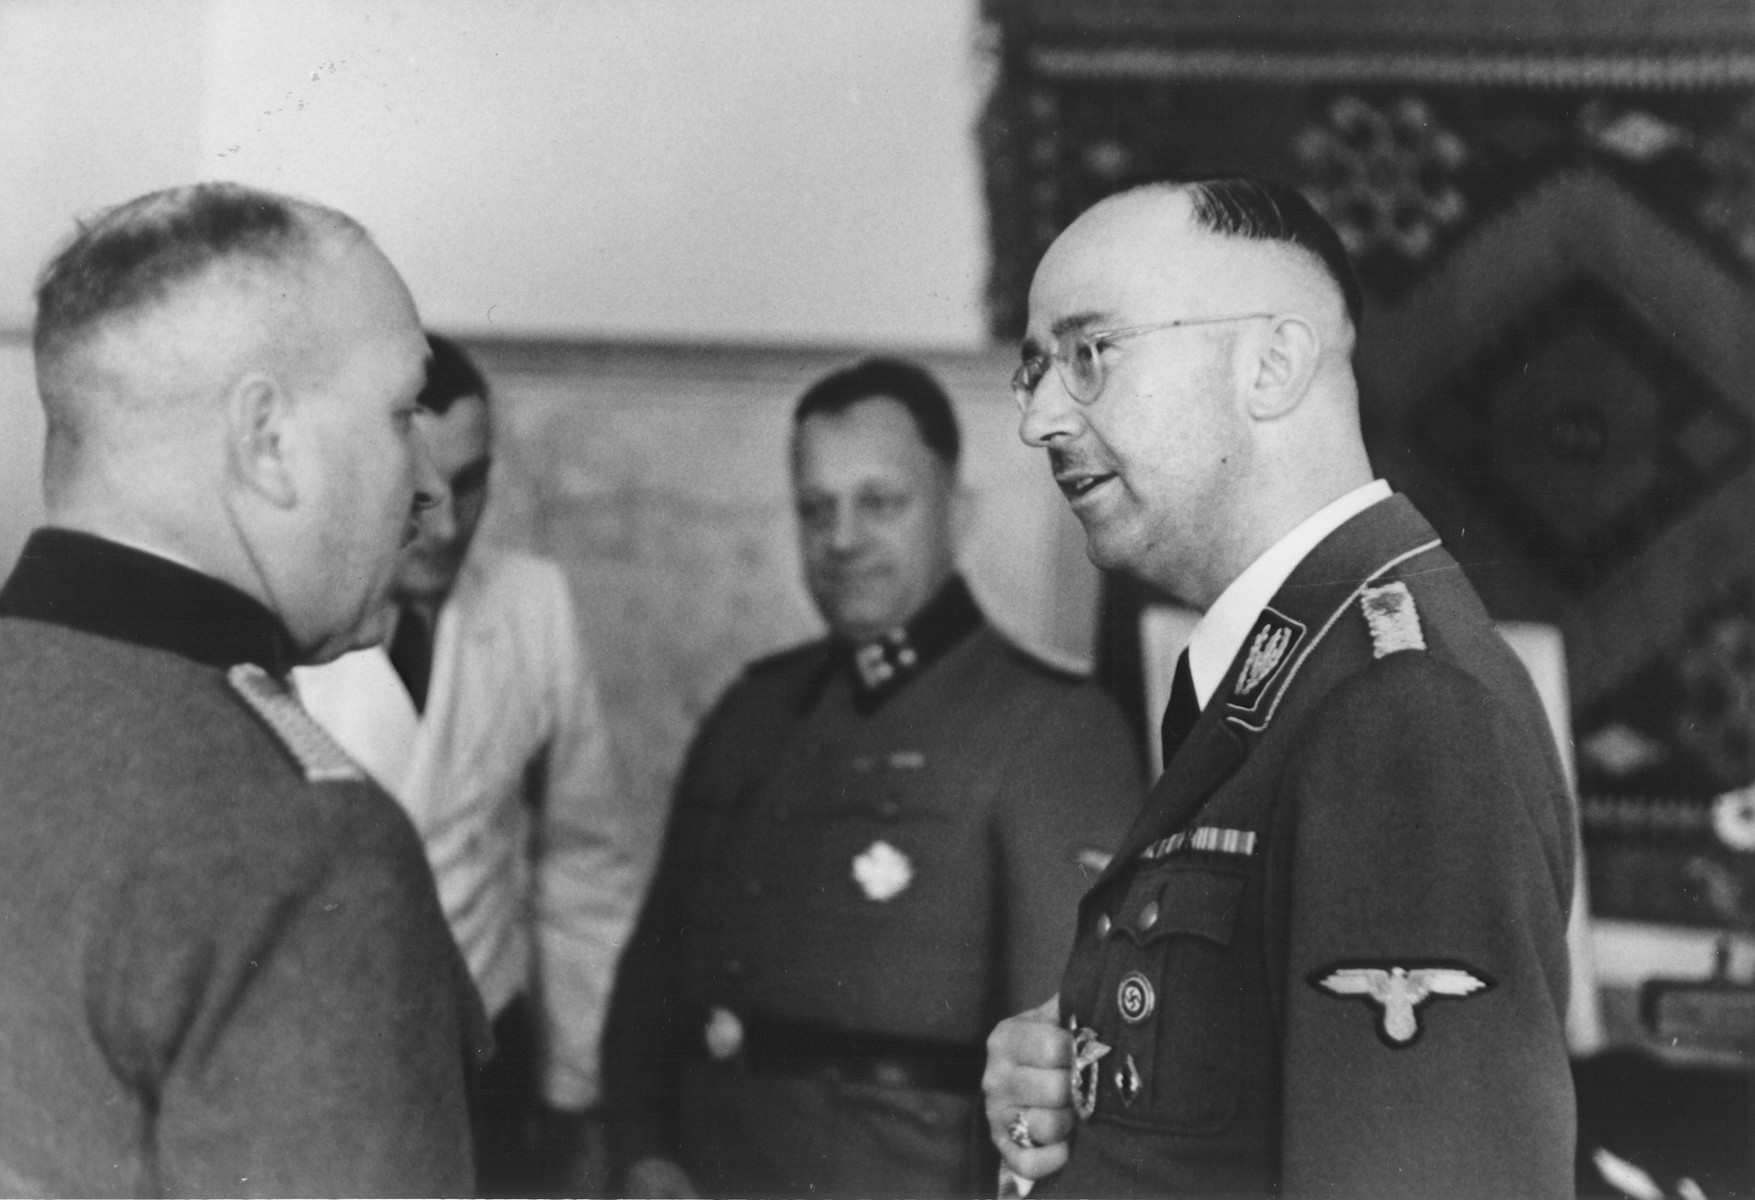 Reichsfuehrer-SS Heinrich Himmler accepts the well wishes of SS police officers on the occasion of his birthday at SS headquarters in the Hegewald bei Zhitomir compound.

The man speaking with Himmler is a member of the Ordnungspolizei.  Pictured in the center SS Obersturmbannfuehrer Josef Tiefenbacher.